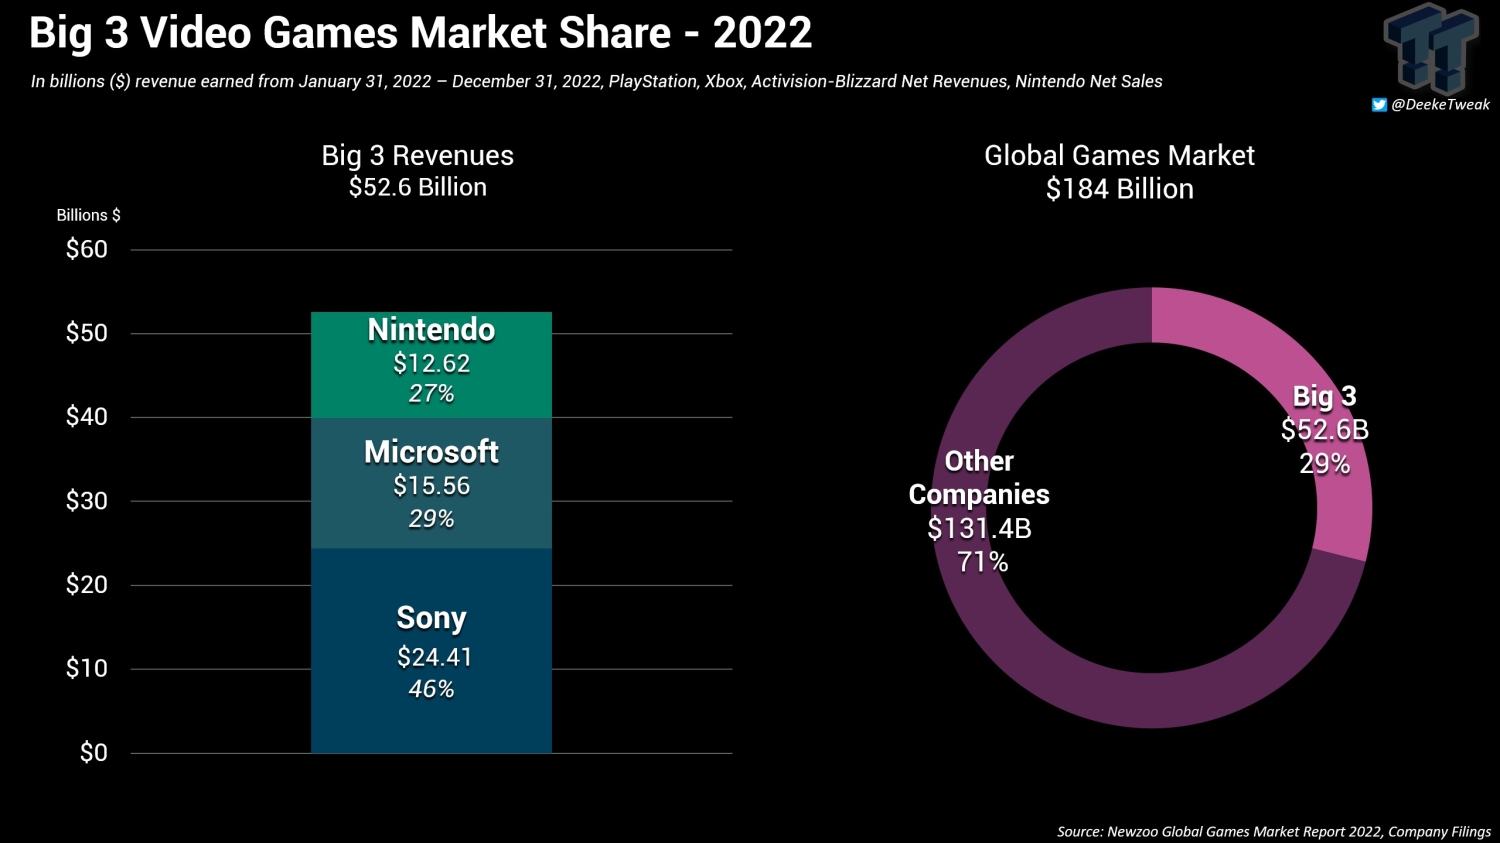 Big 3 market share: PlayStation, and slightly fluctuate 2022